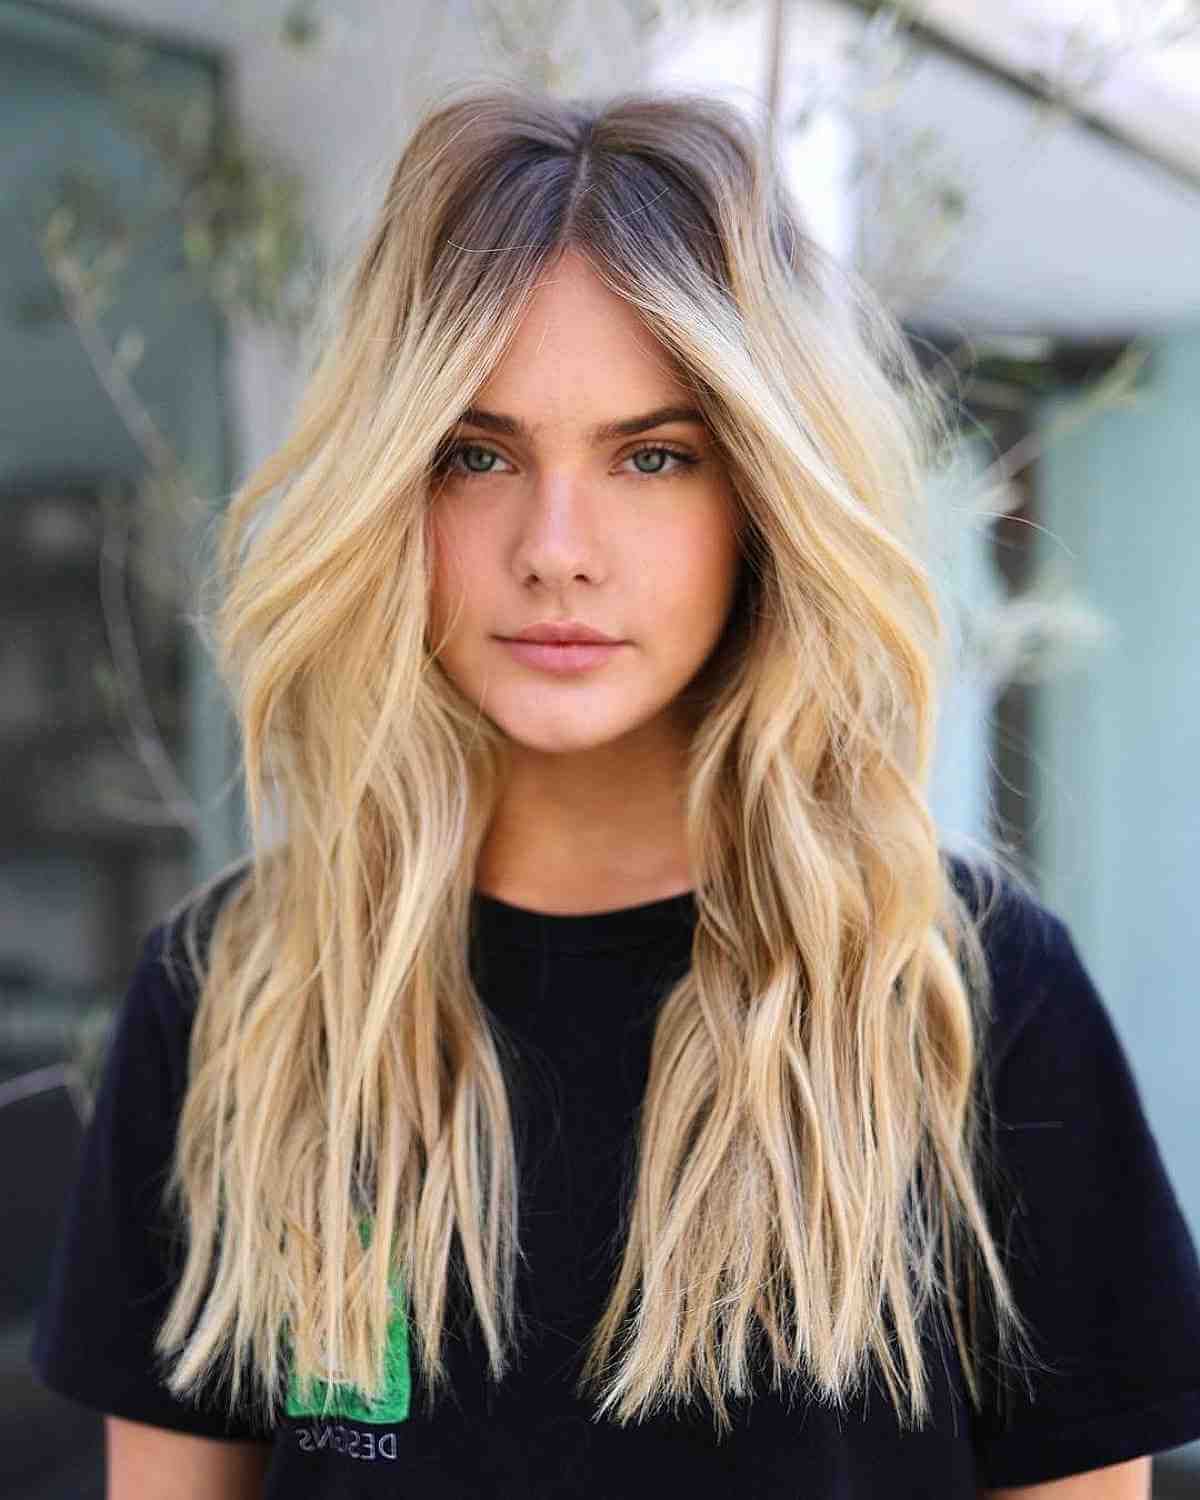 43 Flattering Middle Part Hairstyles Trending Right Now Regarding Most Current Middle Parted Medium Length Hairstyles (View 16 of 20)